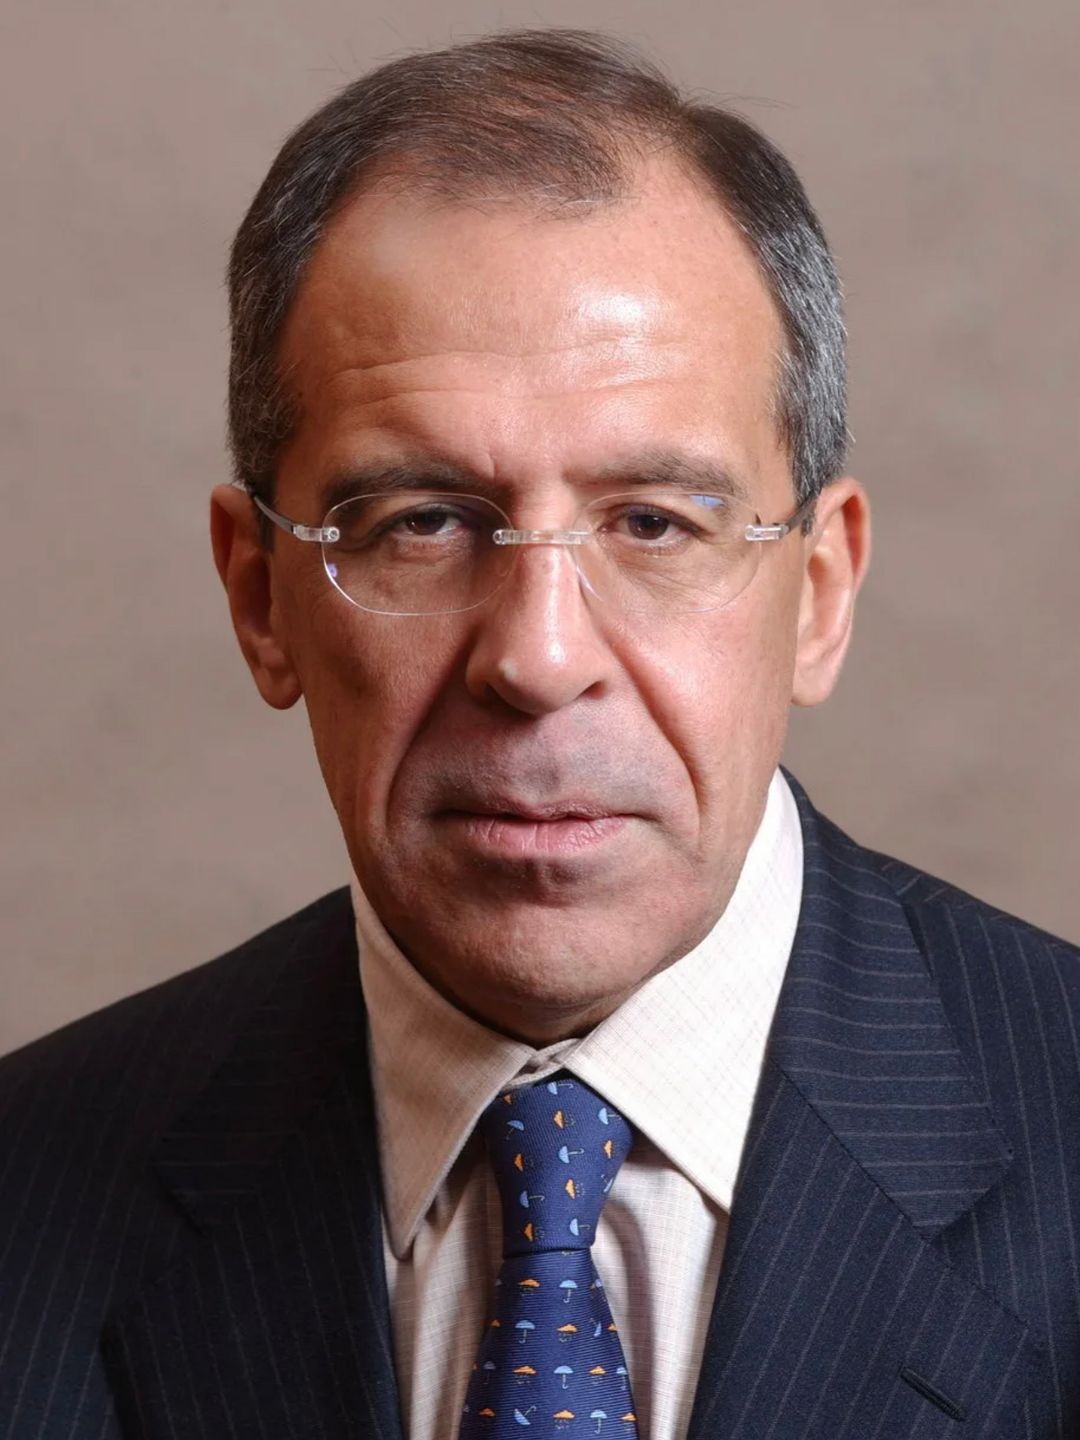 Sergey Lavrov in real life